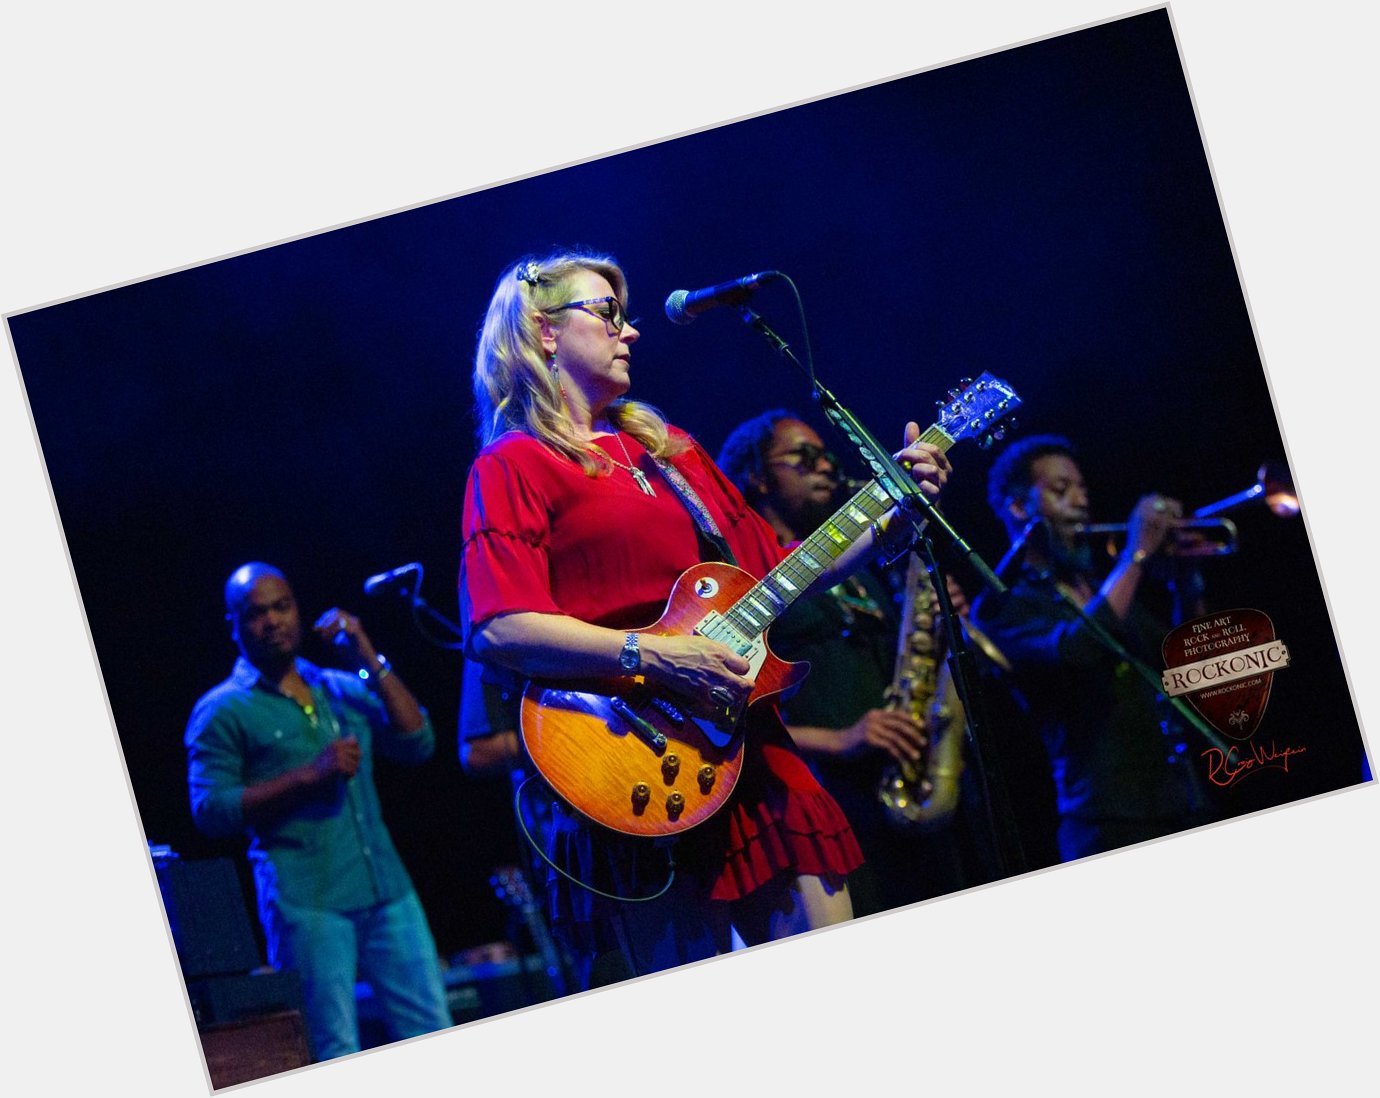 To wish the one-and-only Susan Tedeschi of a HAPPY BIRTHDAY! 